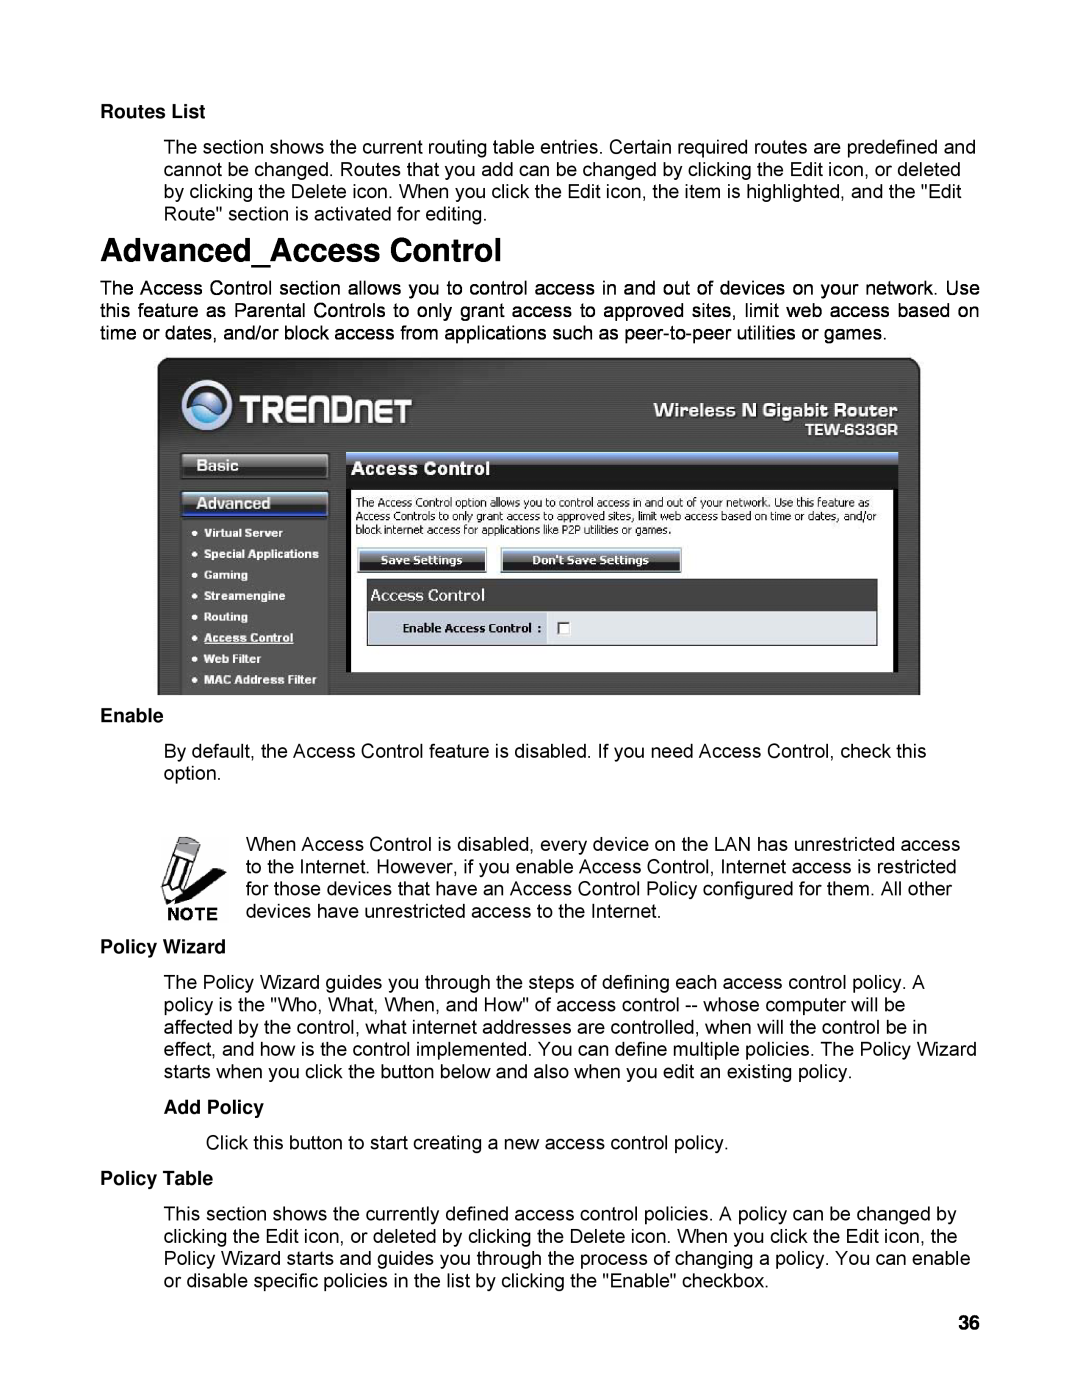 TRENDnet TEW-633GR manual AdvancedAccess Control, Routes List, Enable, Policy Wizard, Add Policy, Policy Table 